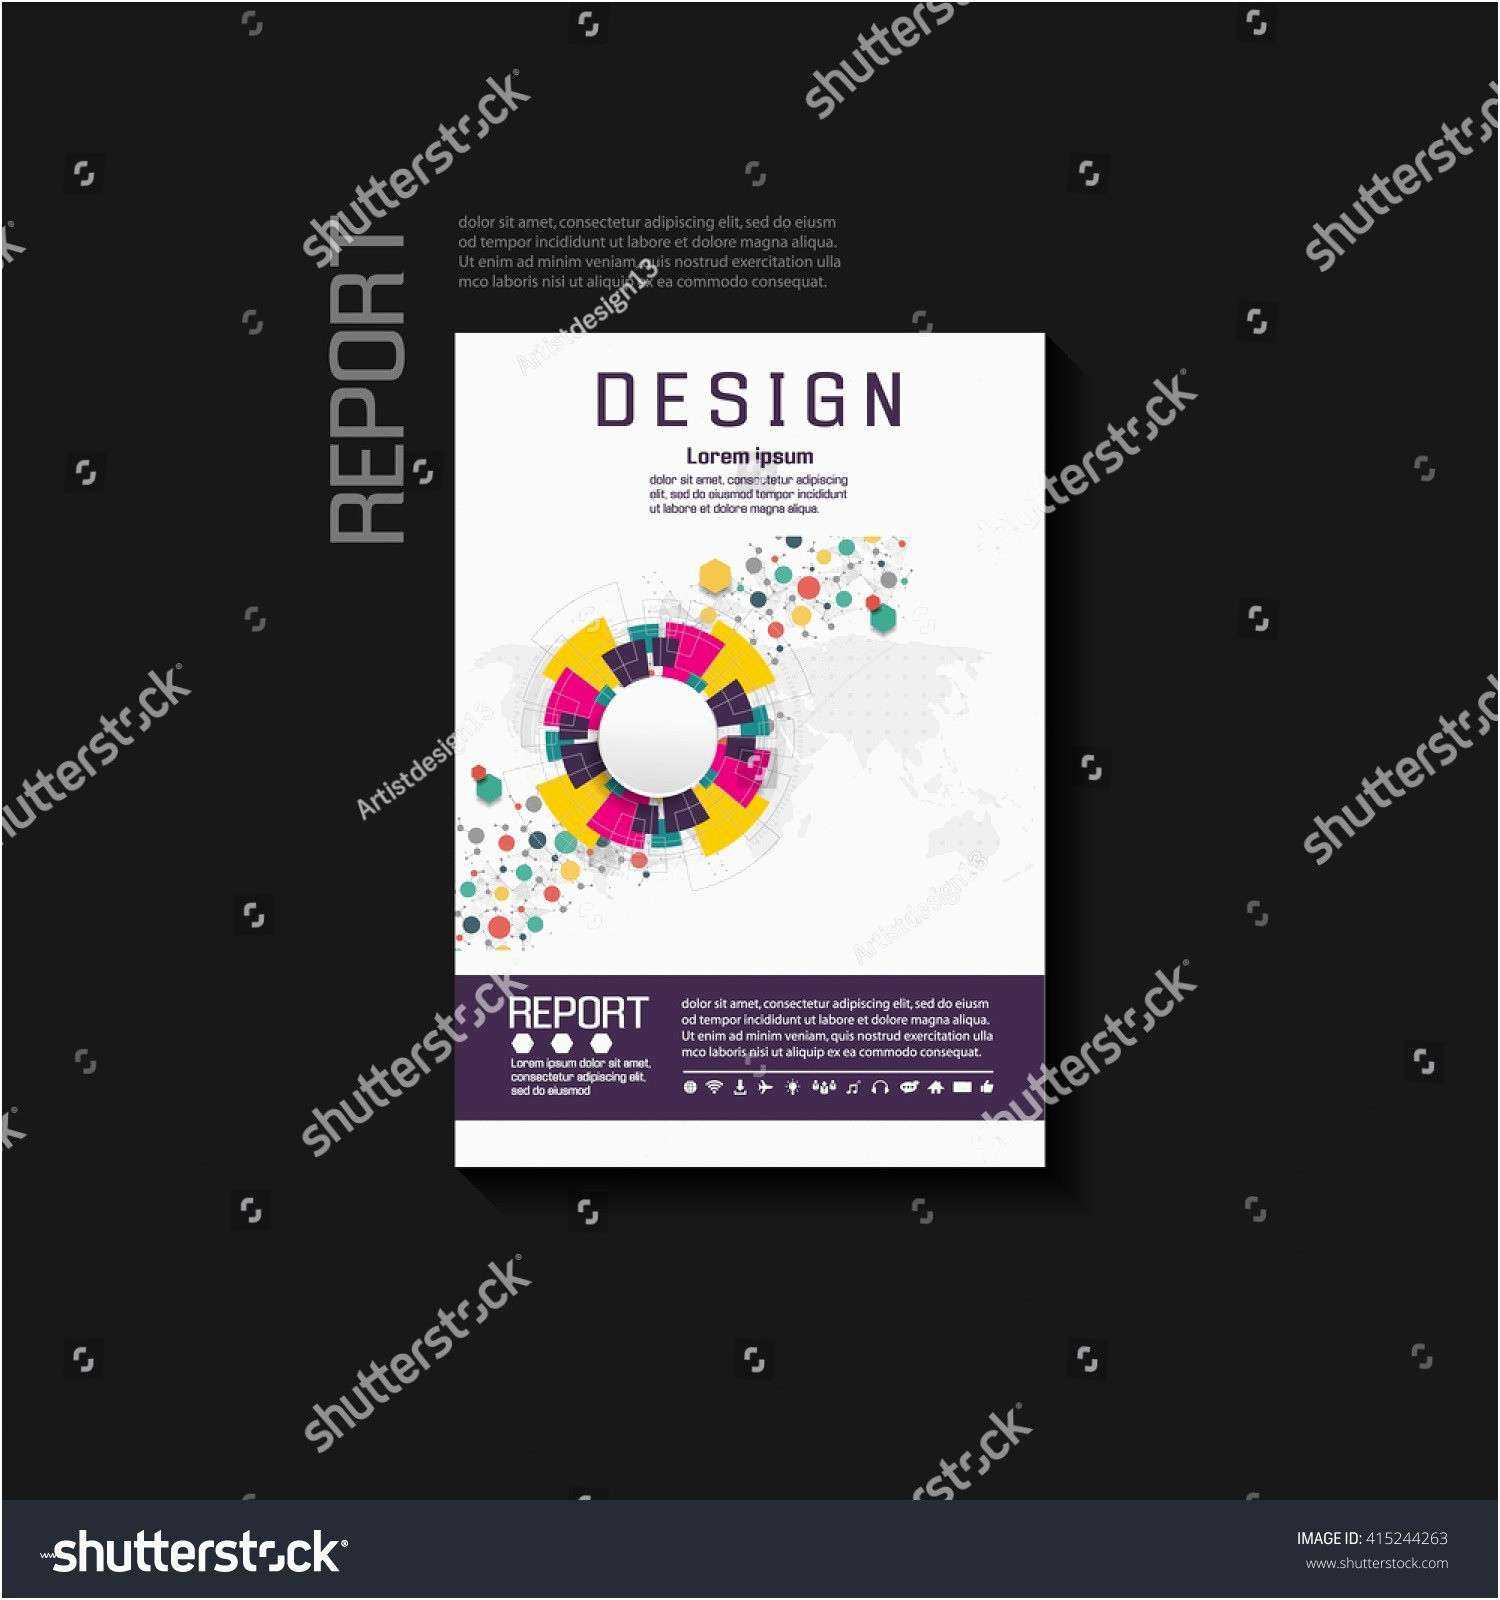 Business Cards For Teachers Templates Free – Caquetapositivo In Business Cards For Teachers Templates Free